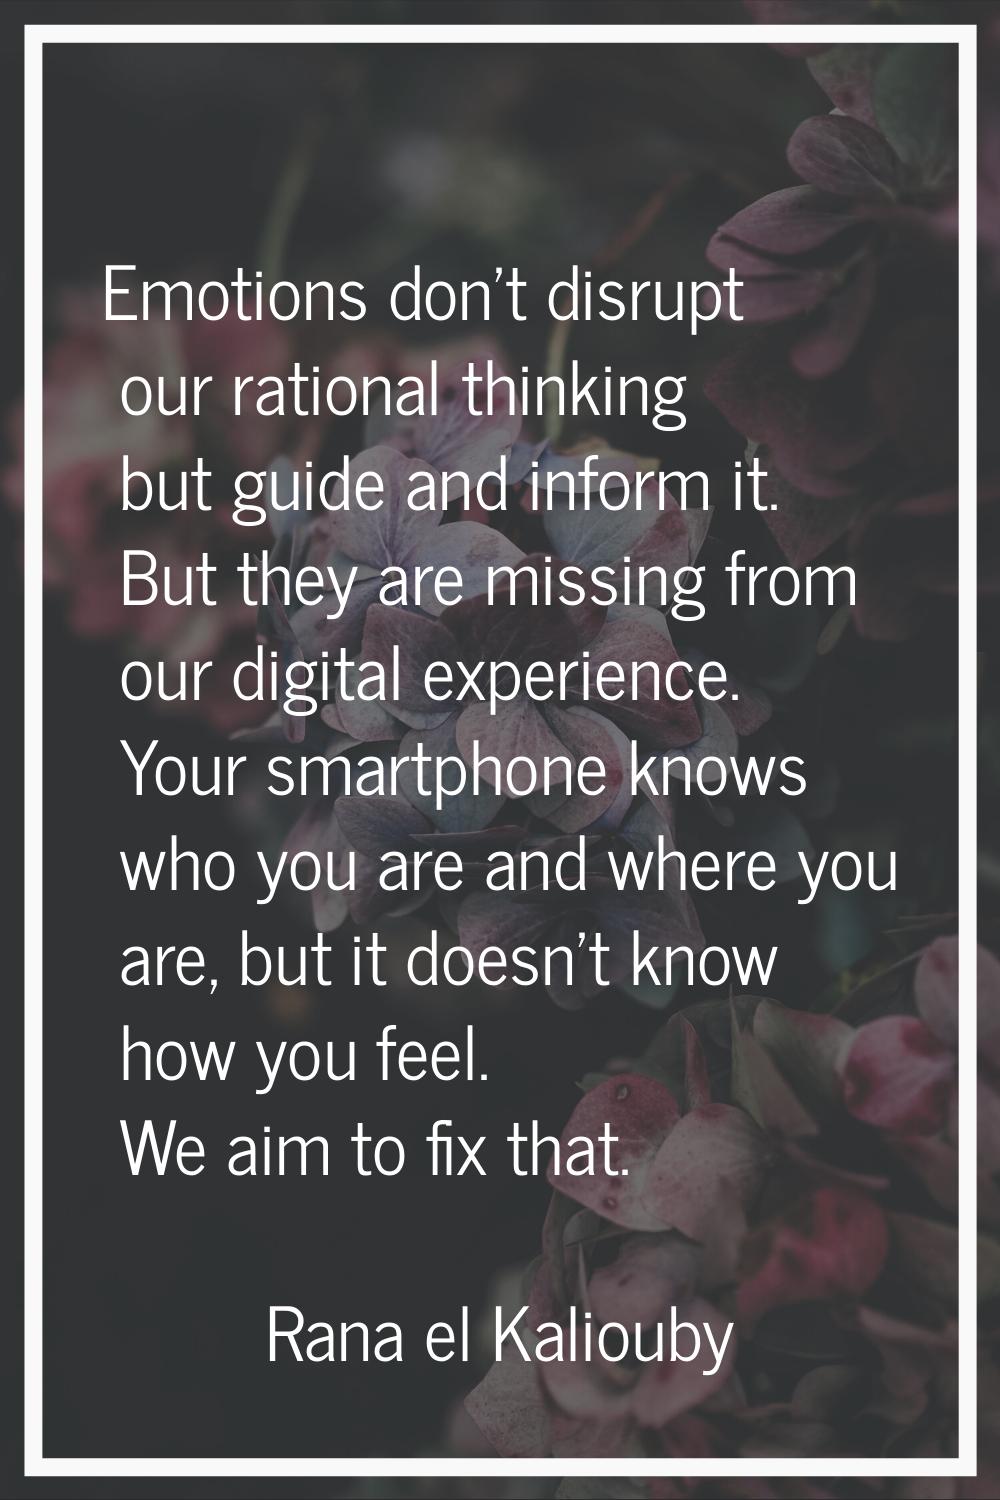 Emotions don't disrupt our rational thinking but guide and inform it. But they are missing from our